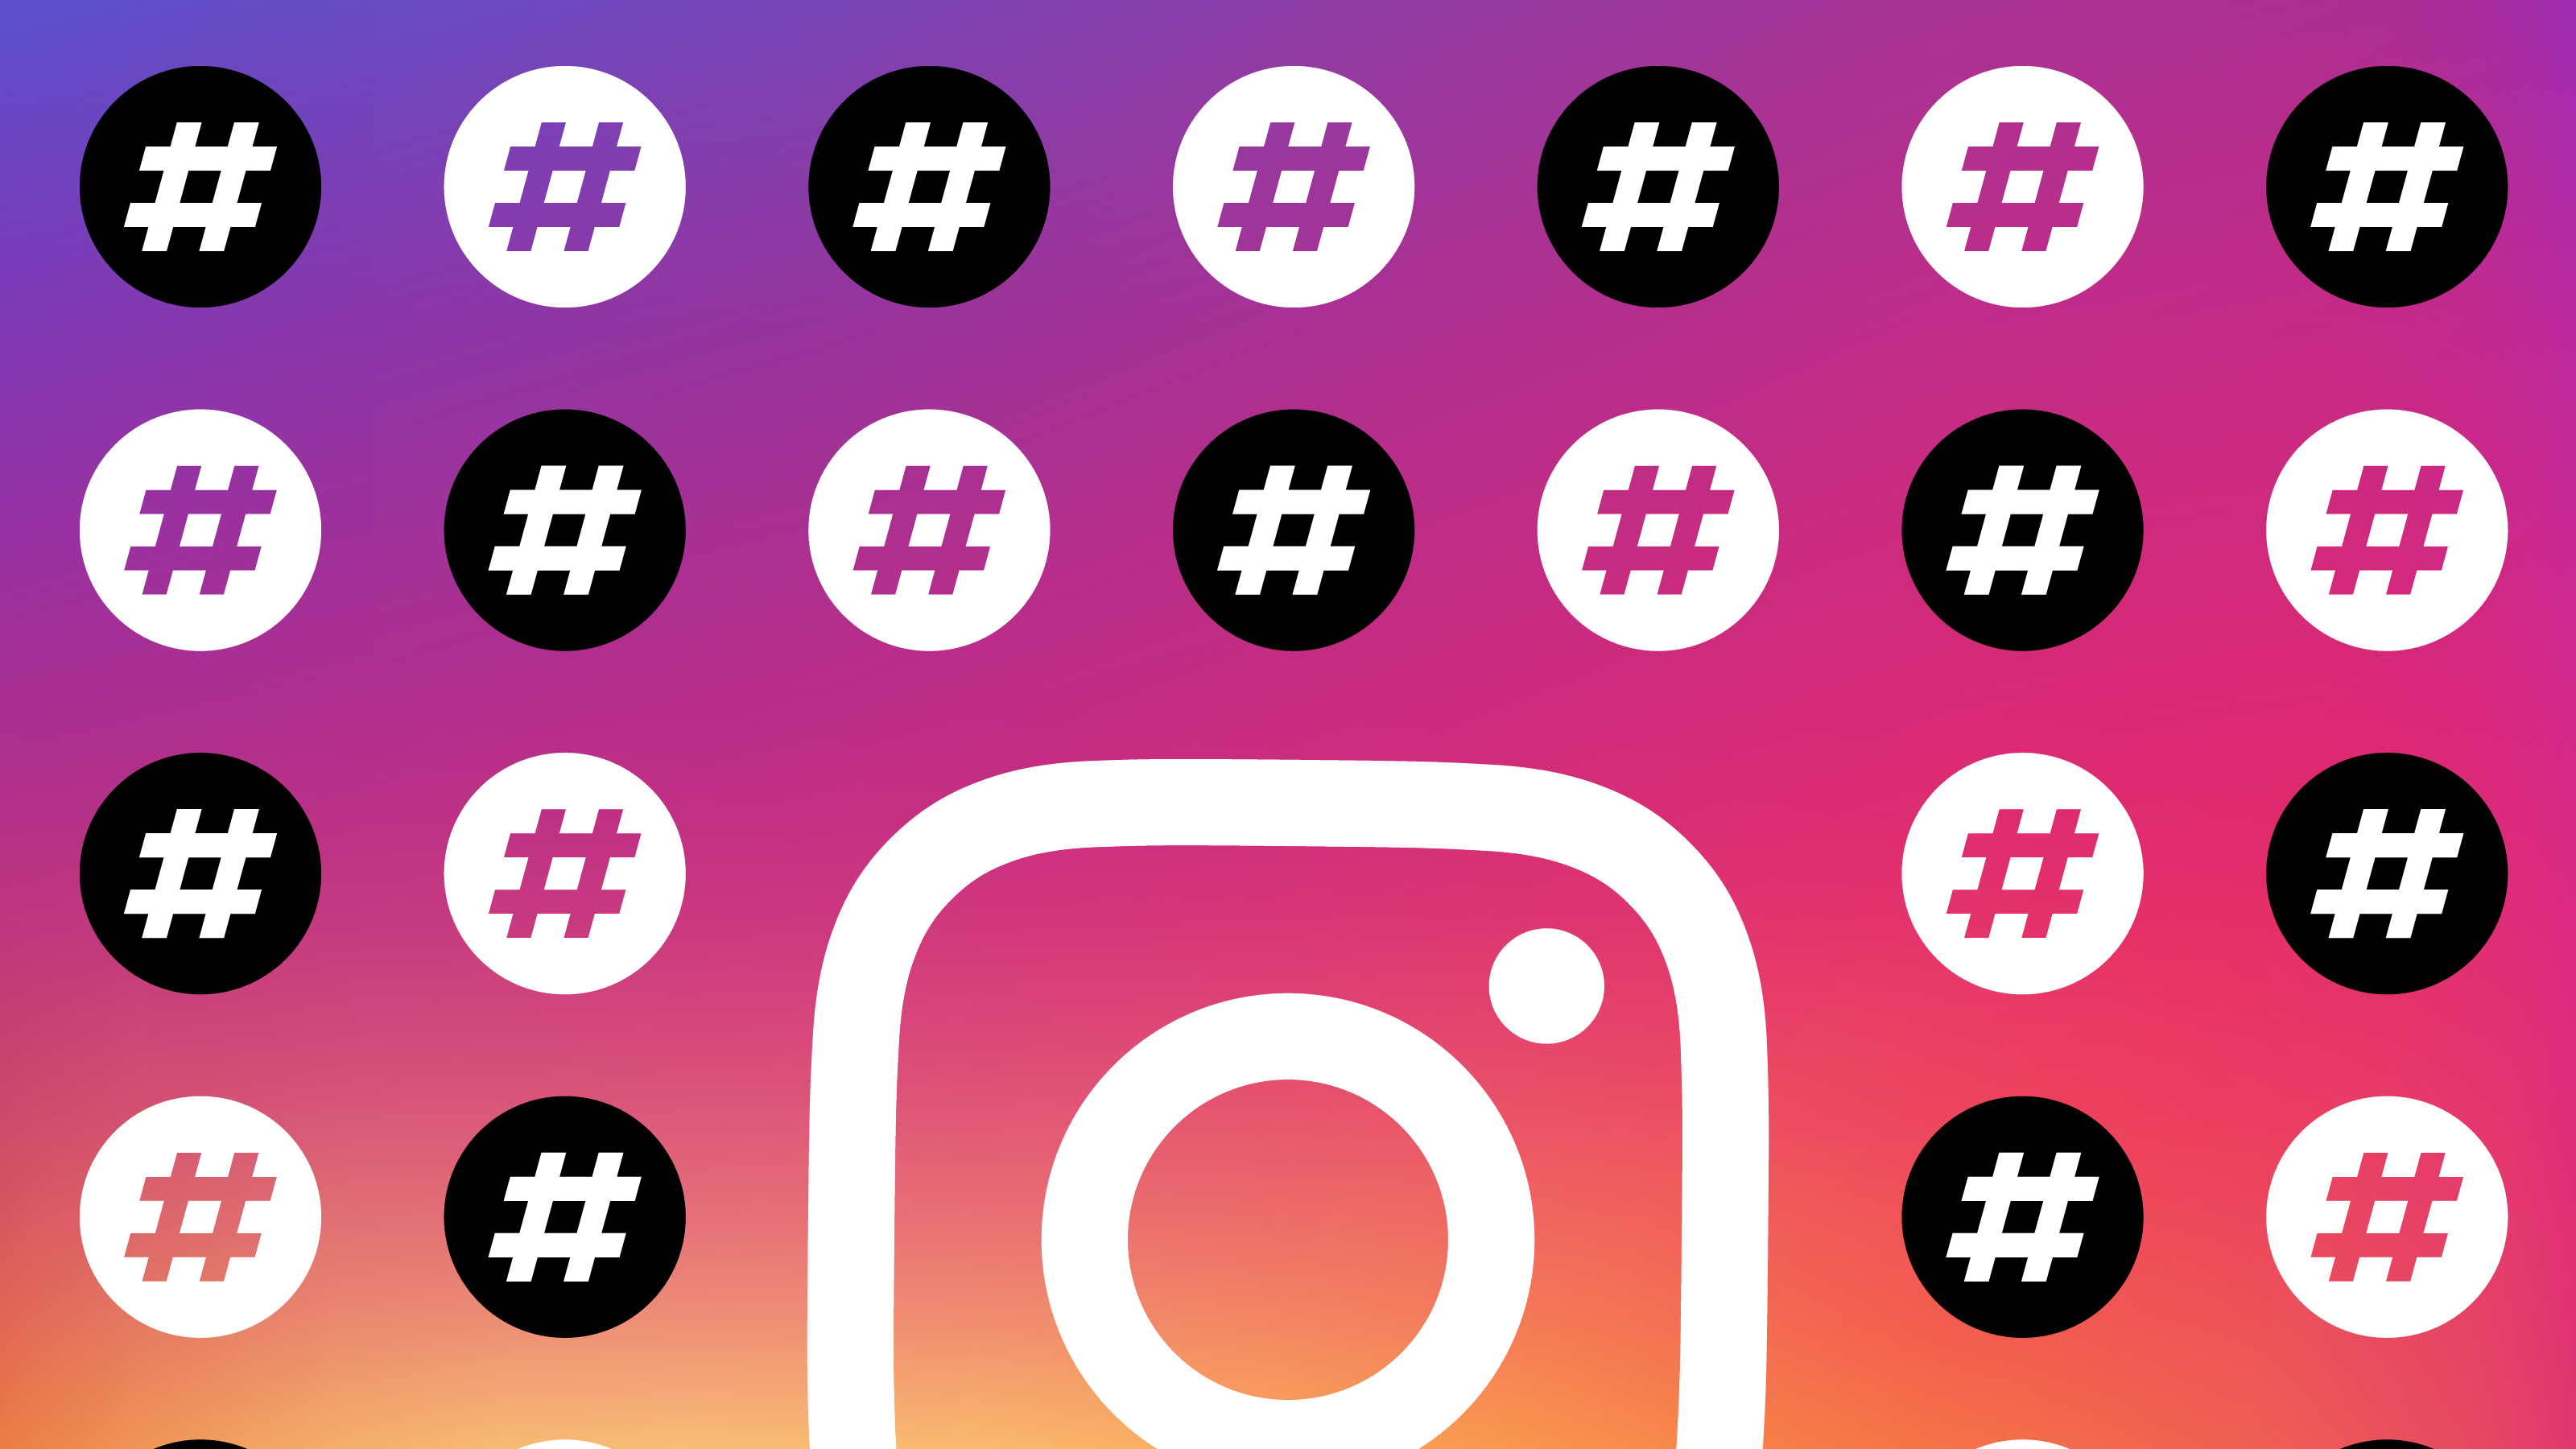 Instagram becomes an interest network with hashtag following | TechCrunch